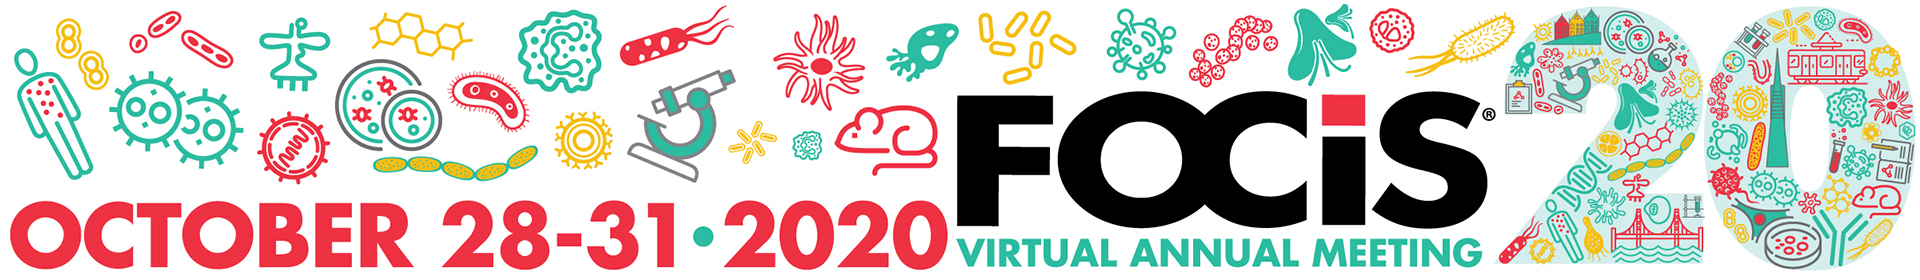 FOCIS 2020 Event Banner